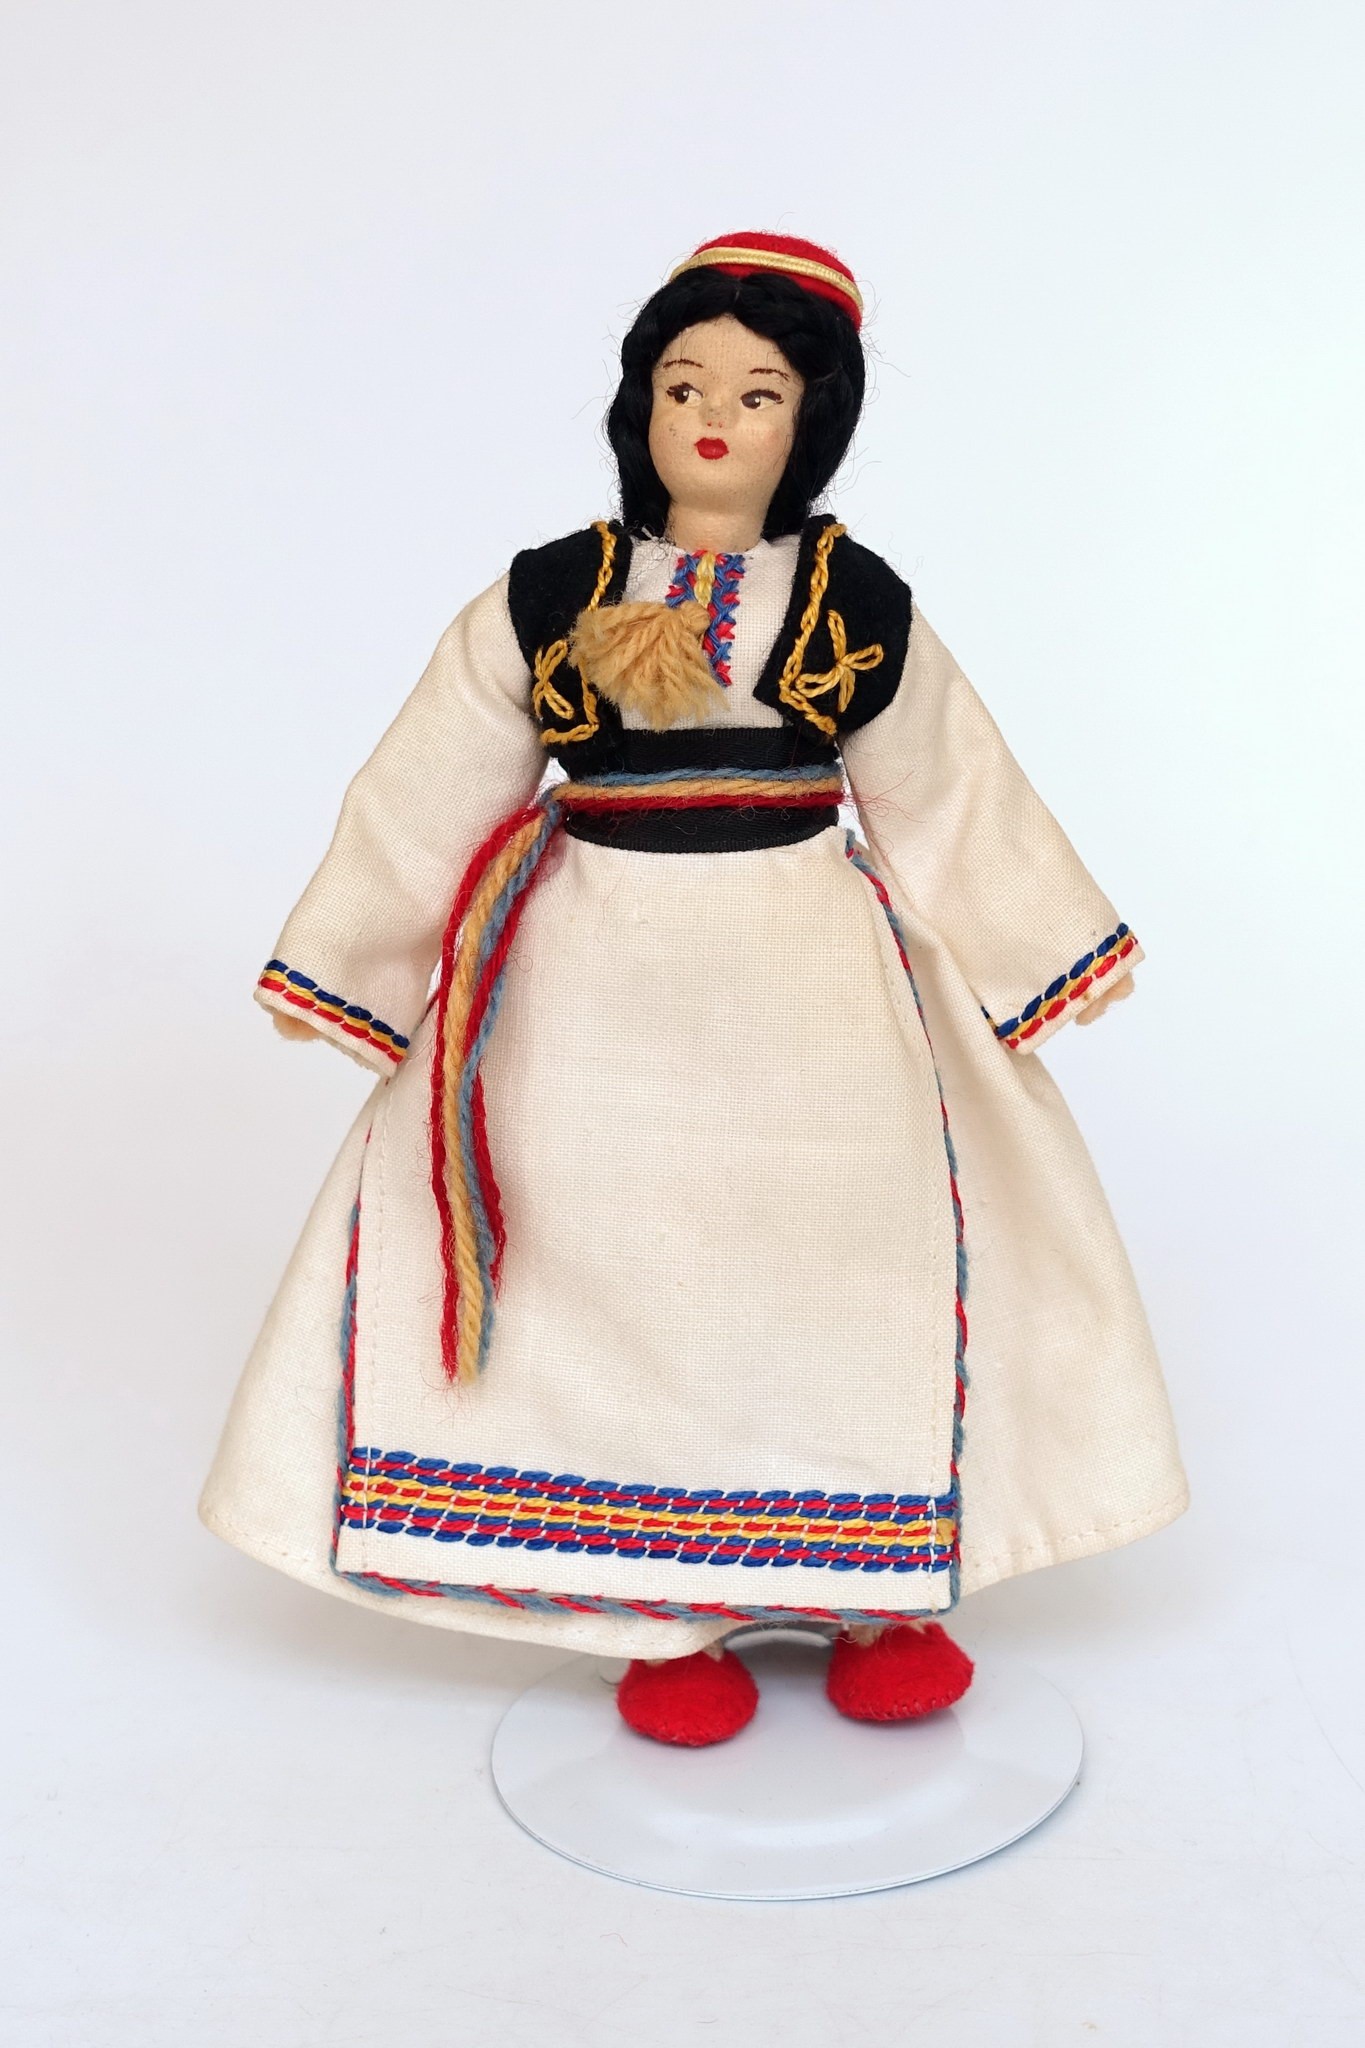 Croatia Doll Cilipi Konavle | National costume dolls from all over the ...